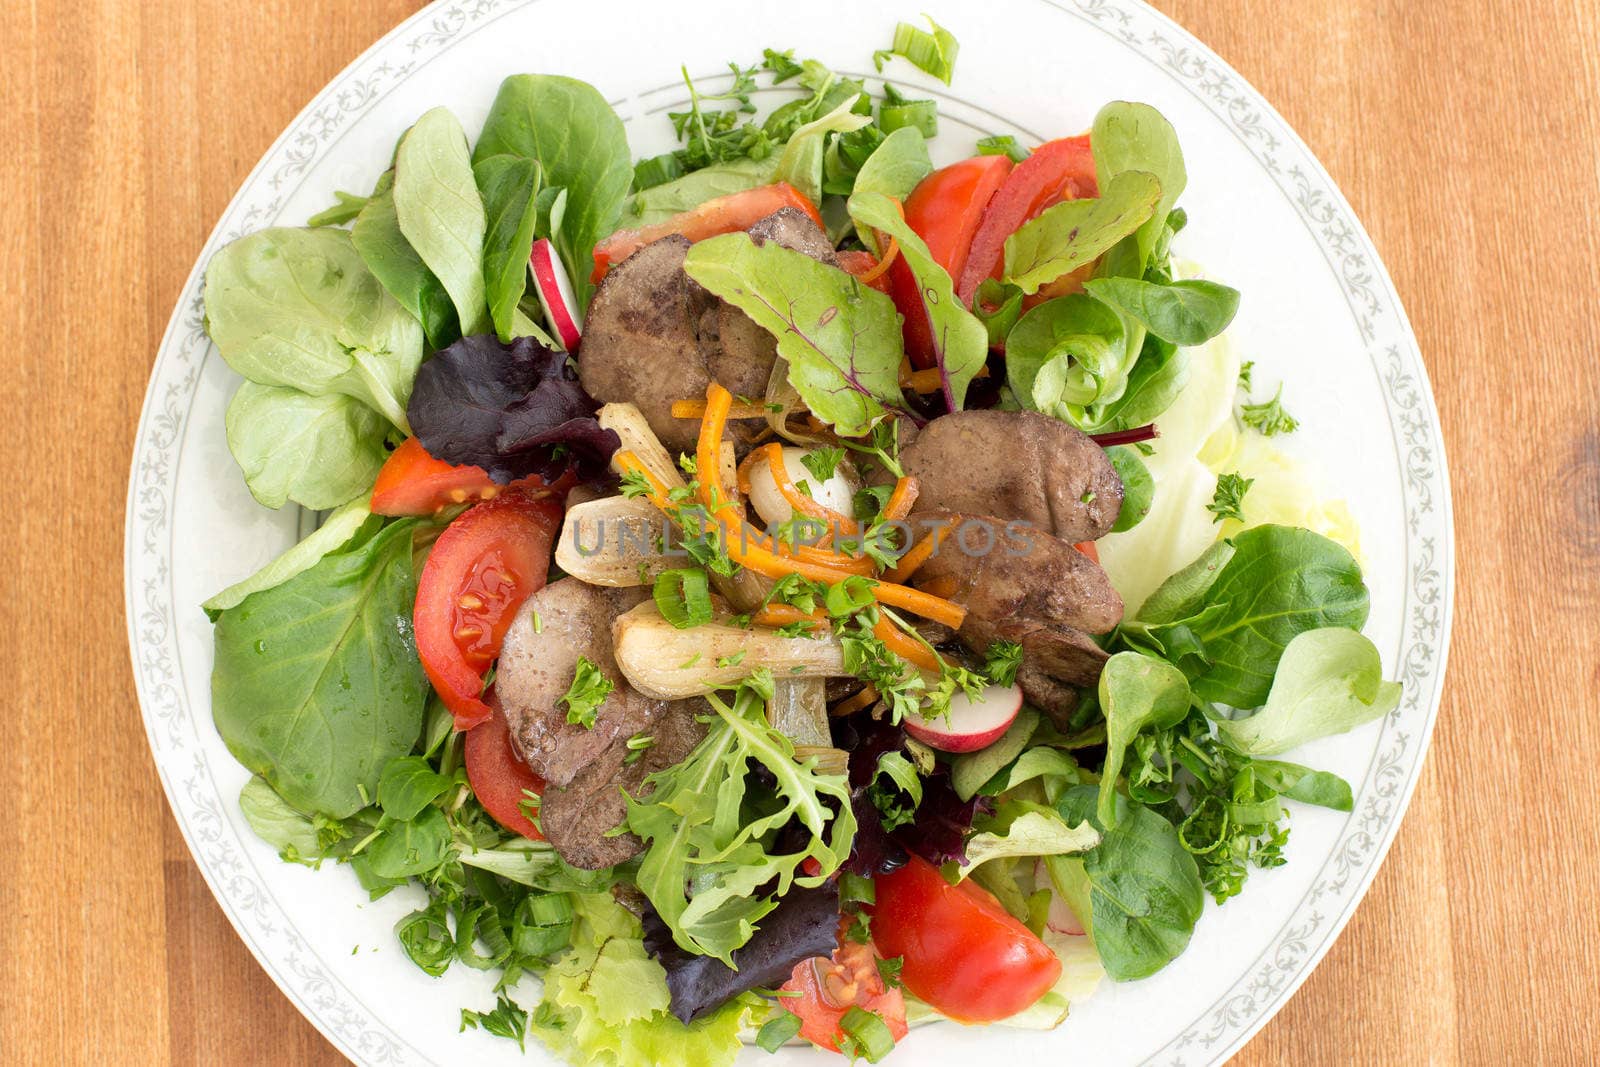 Gourmet salad with fried rabbit liver and fresh vegetables on a wooden table.